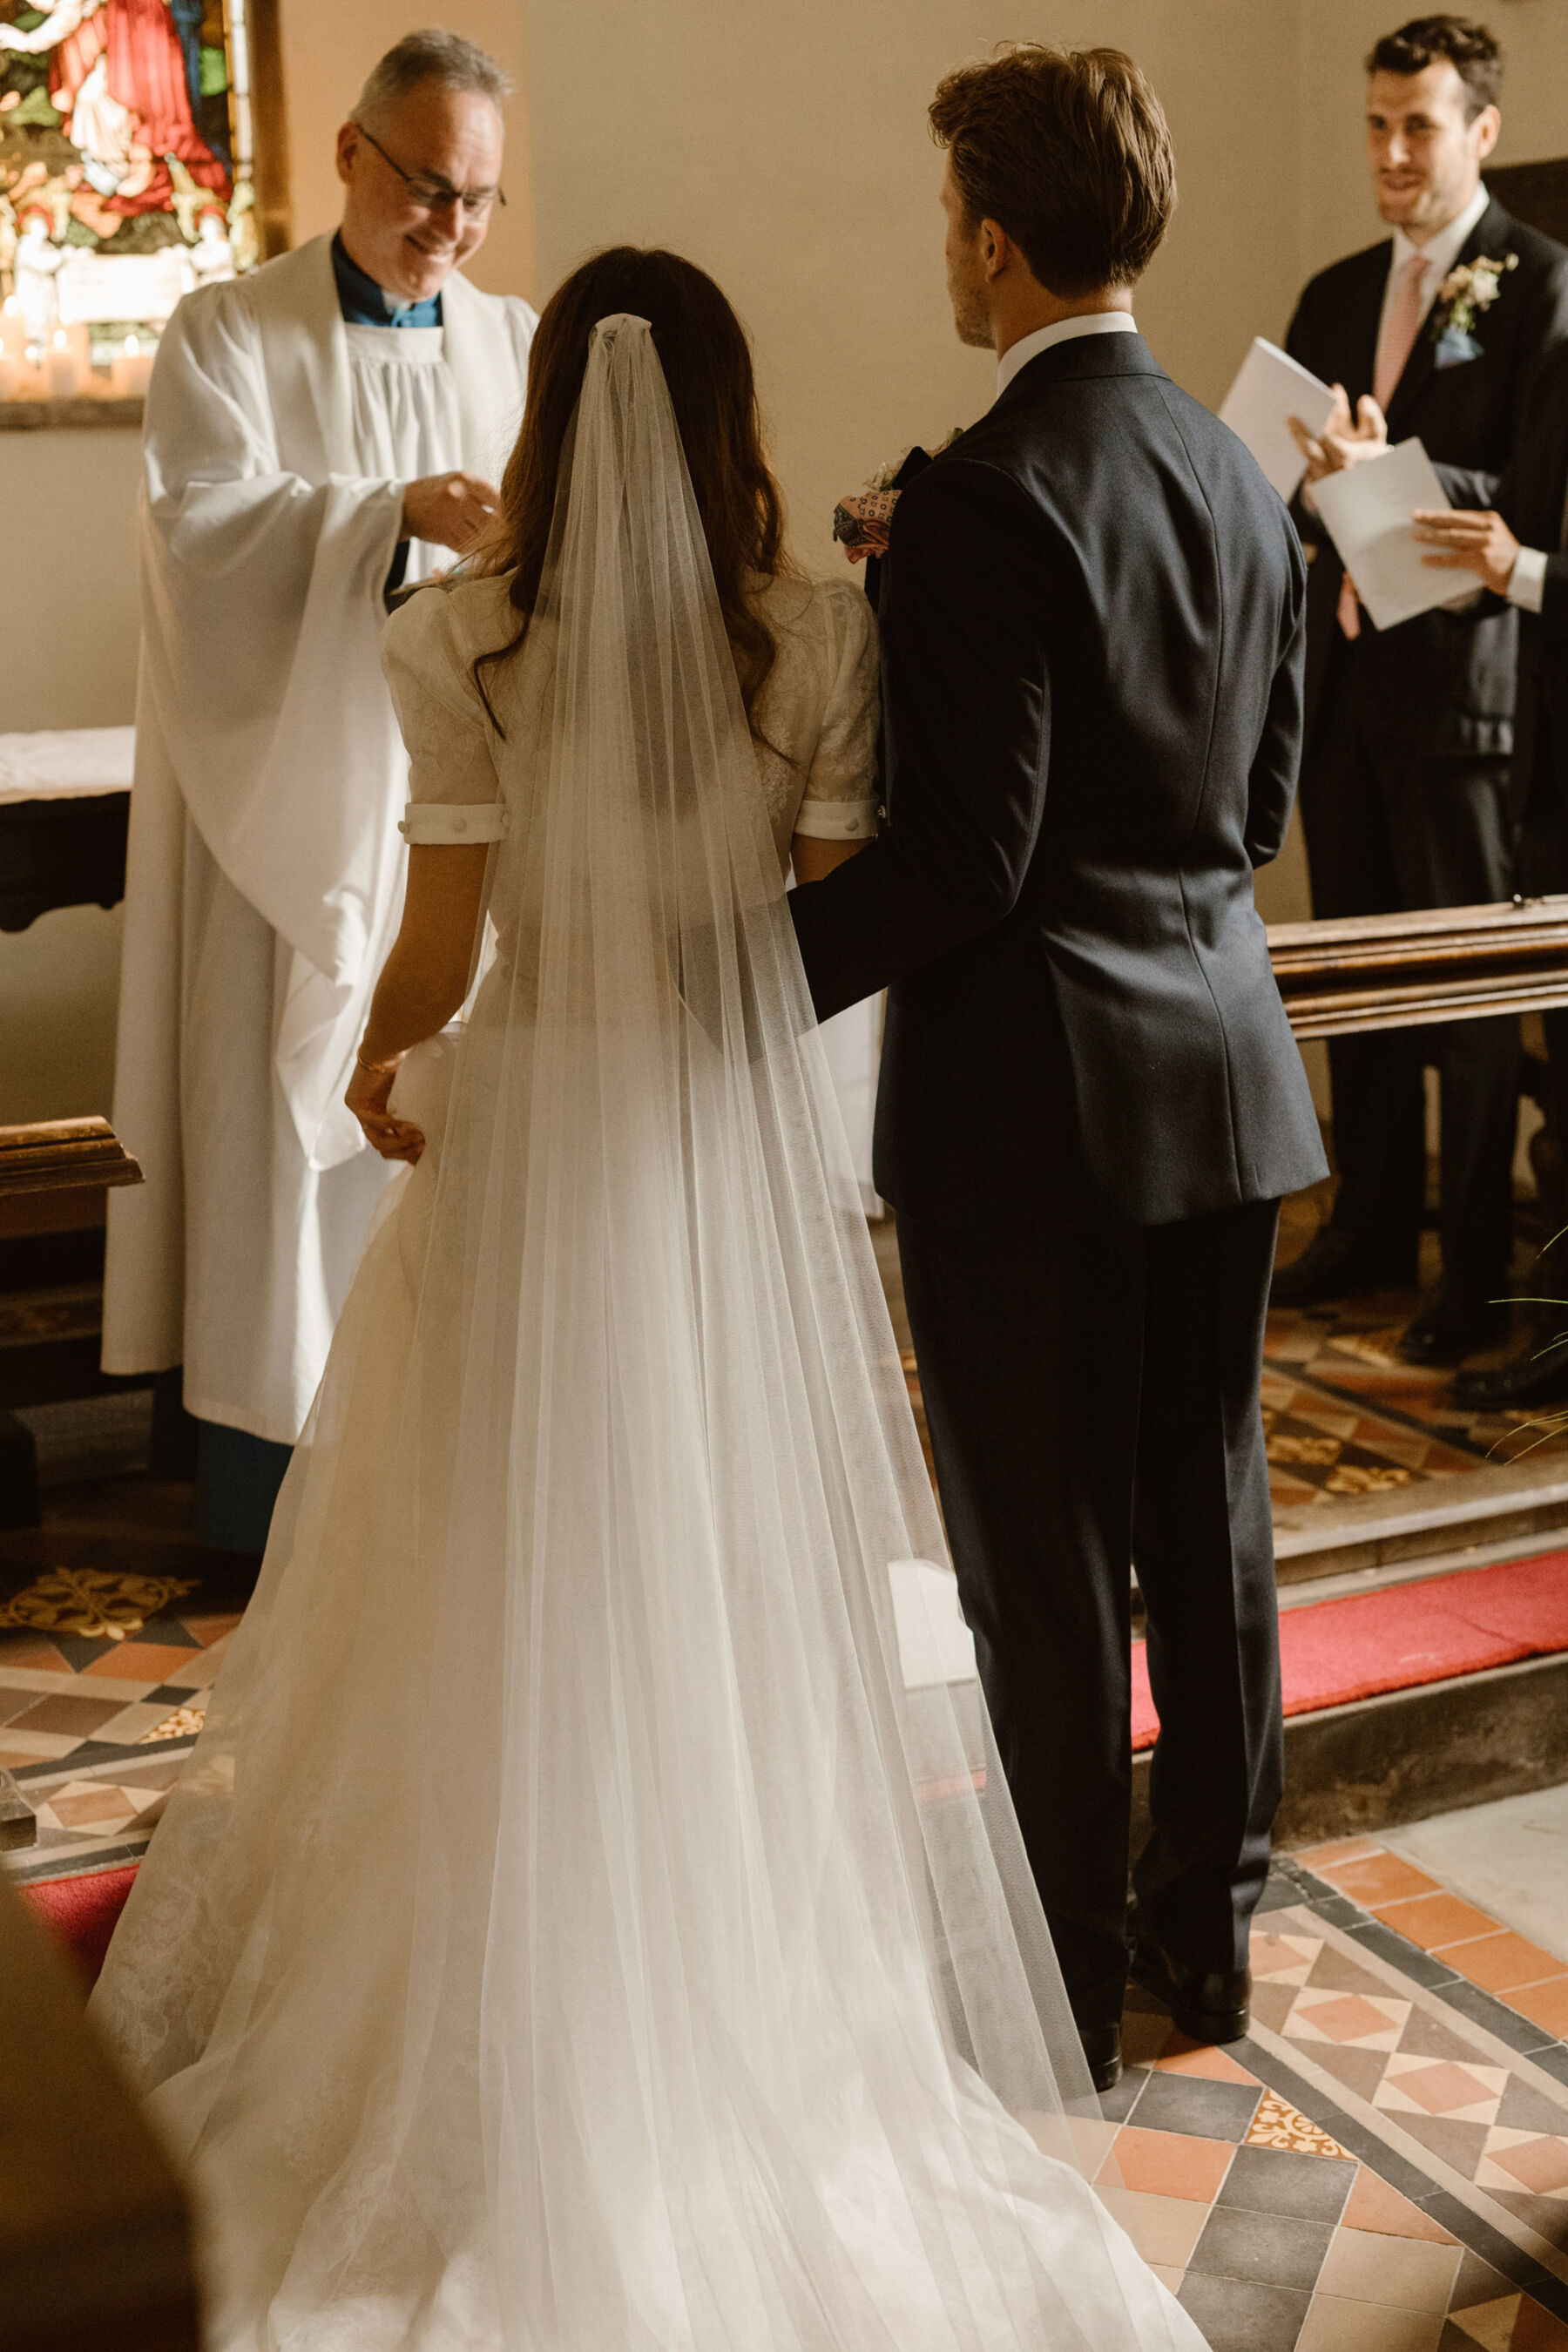 Wedding at Dewsall church, Herefordshire. Bride wears J Andreatta dress and long veil. Agnes Black Photography.